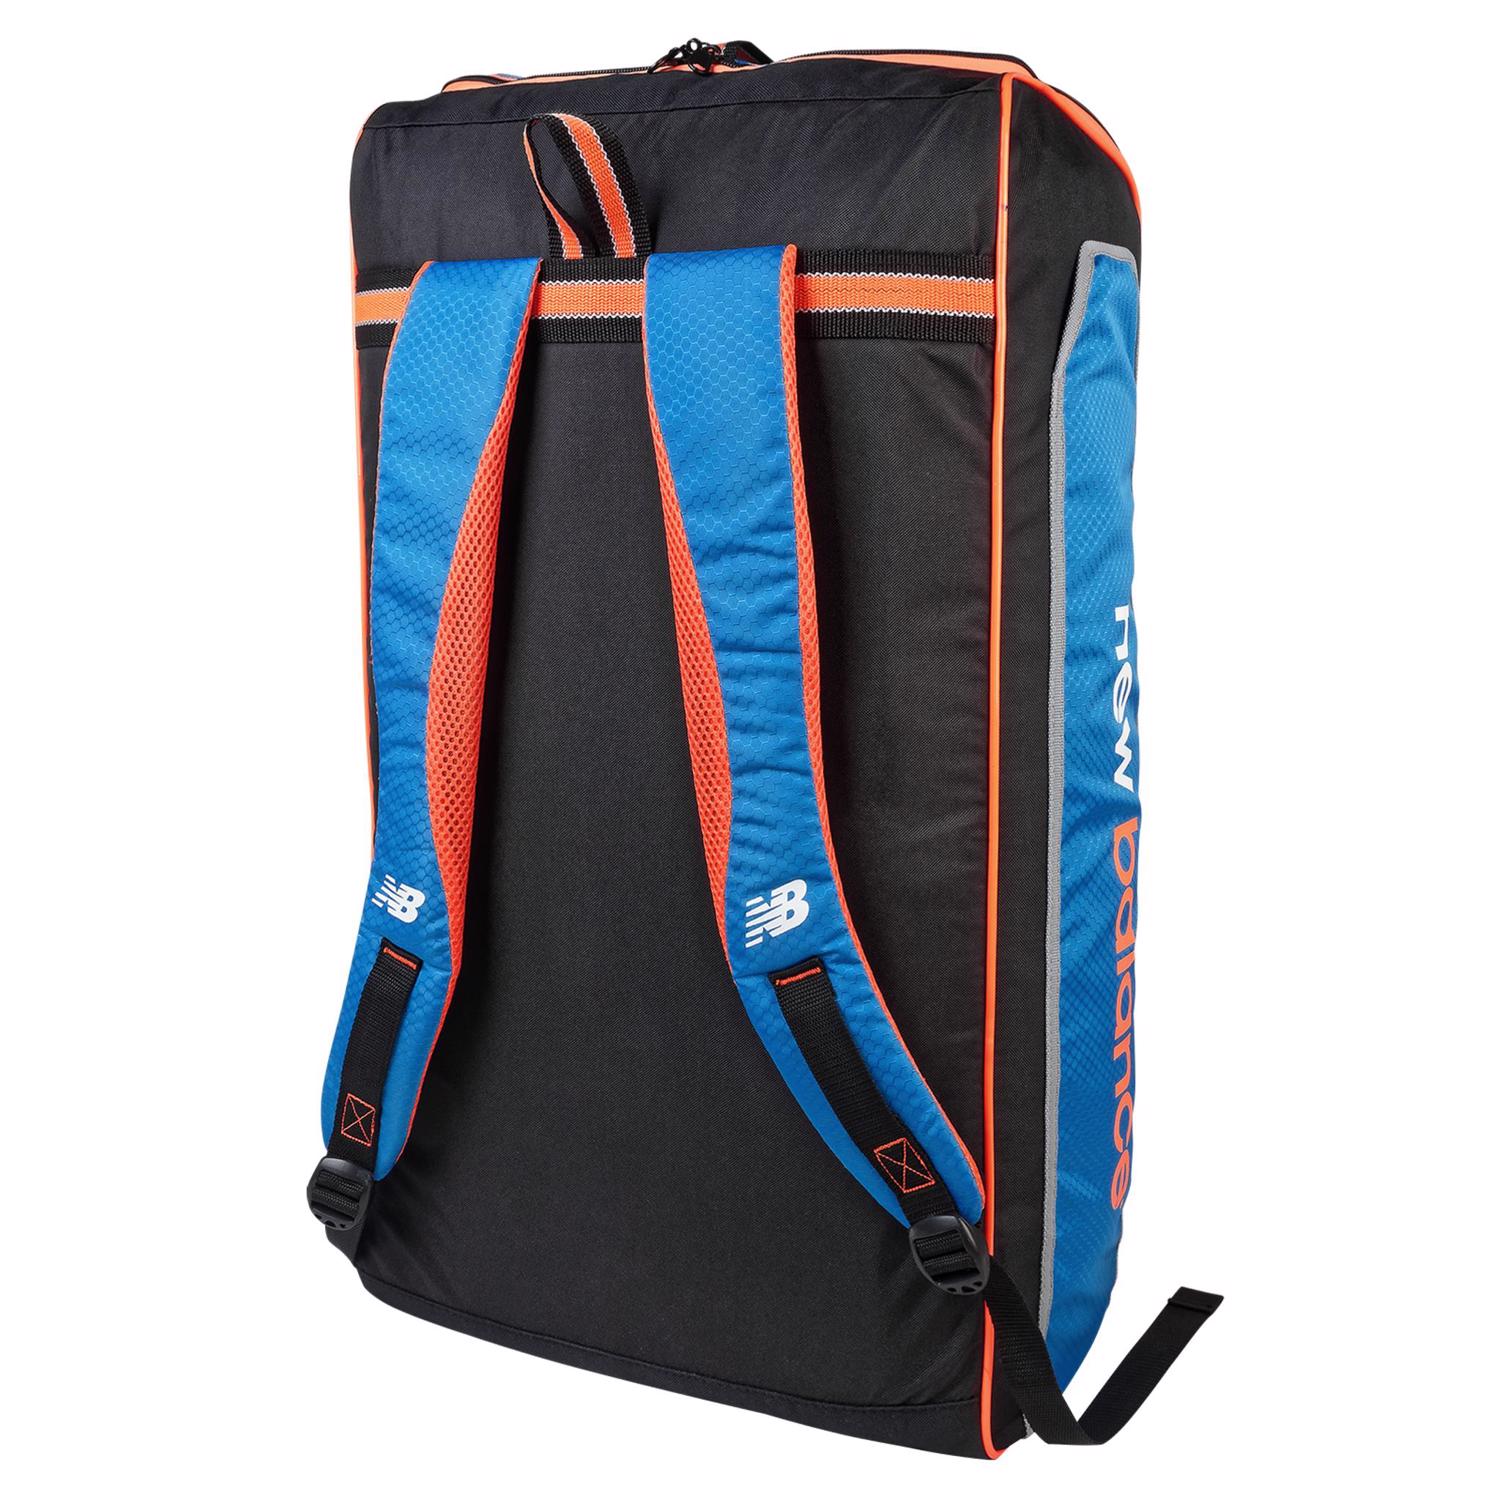 New Balance DC 680 Cricket Backpack - CRICKET BAGS